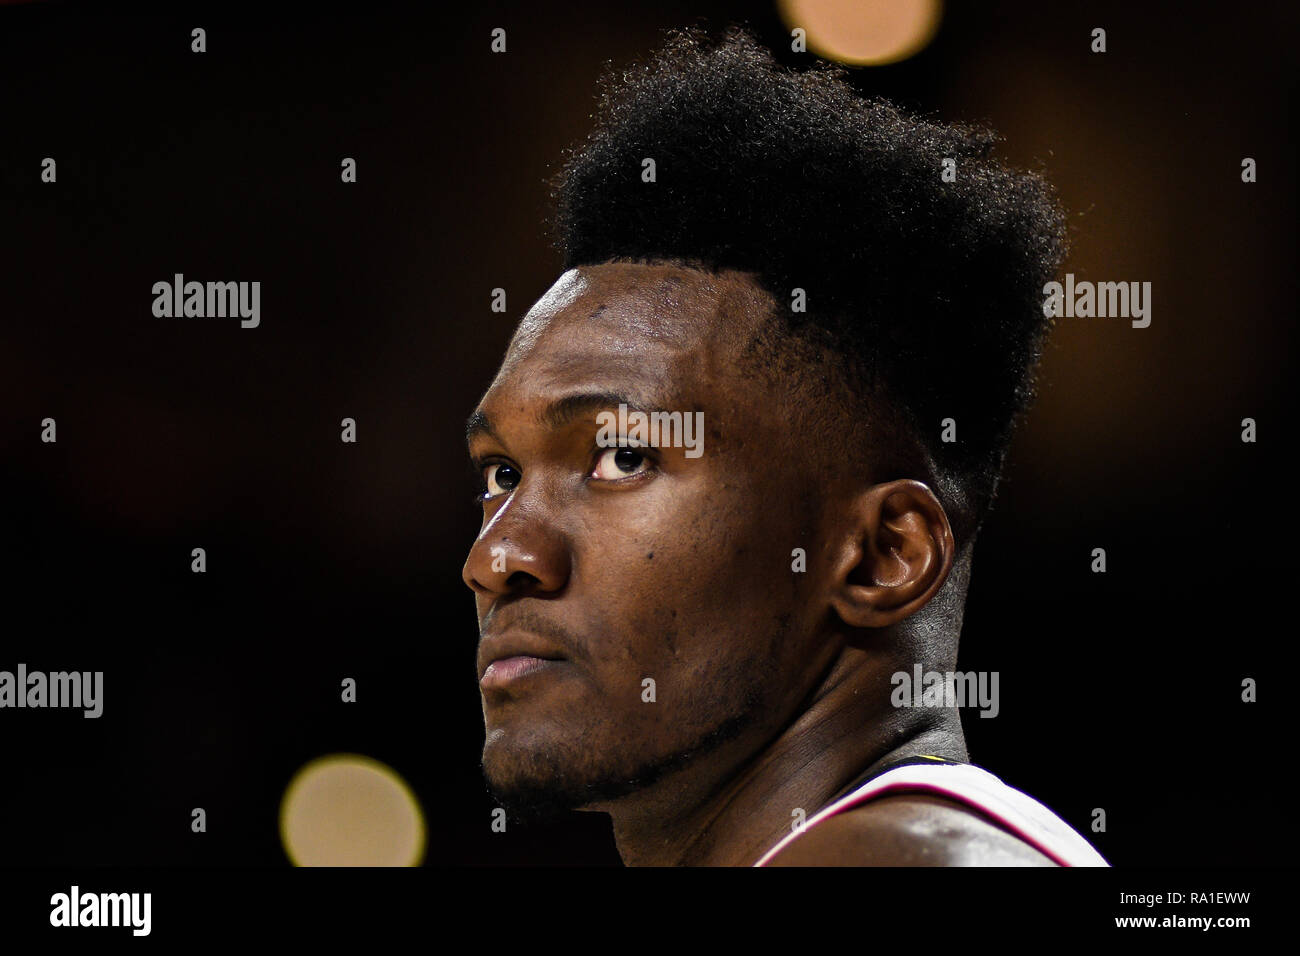 Maryland, USA. 29th Dec, 2018. BRUNO FERNANDO (23) in action during the game held at XFINITY Center in College Park, Maryland. Credit: Amy Sanderson/ZUMA Wire/Alamy Live News Stock Photo